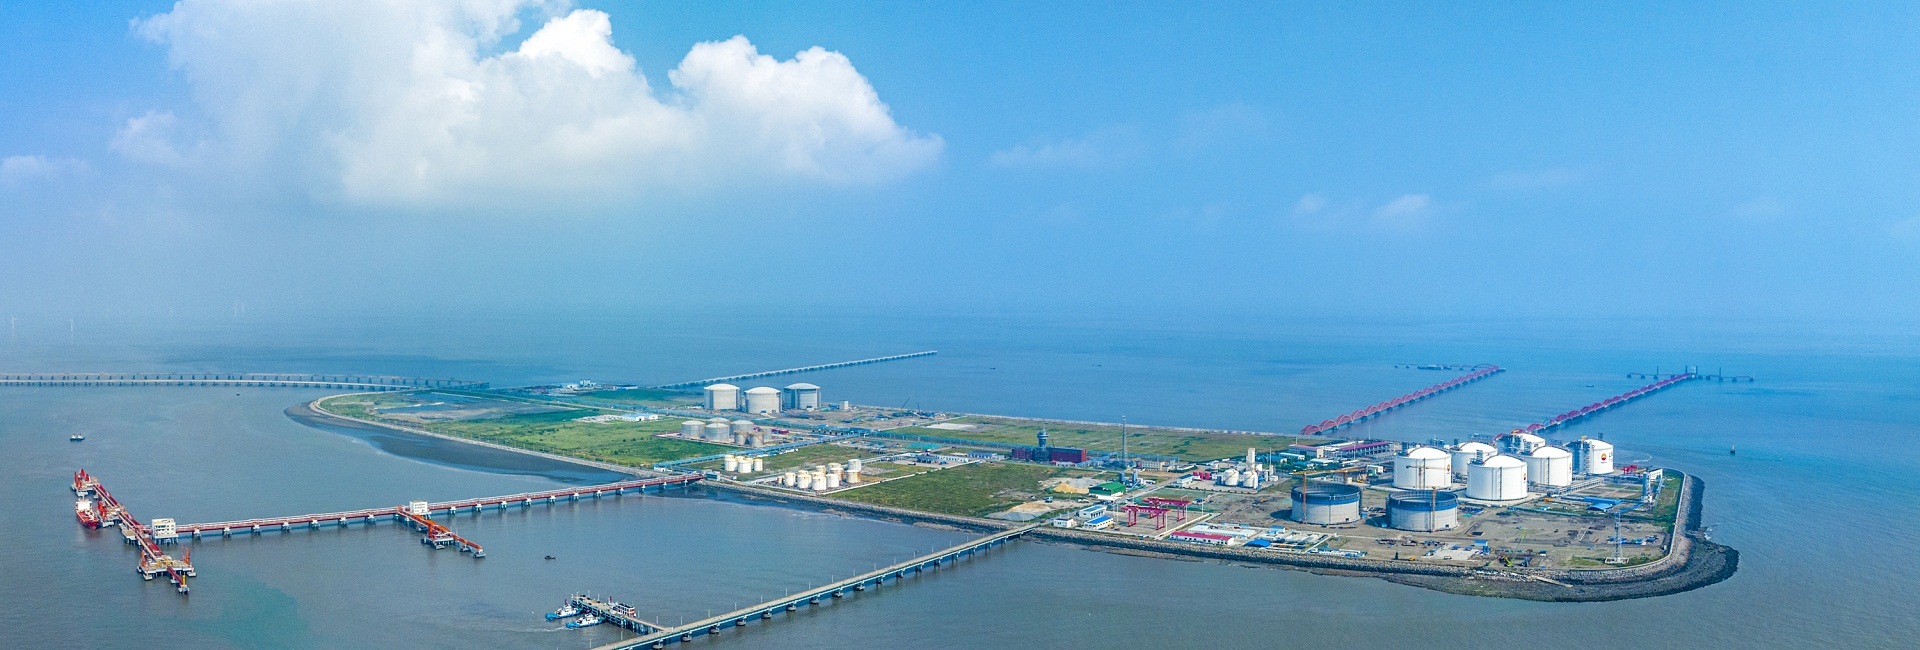 20 Years of Excellence: Yangkou Port to Begin New Chapter of Development